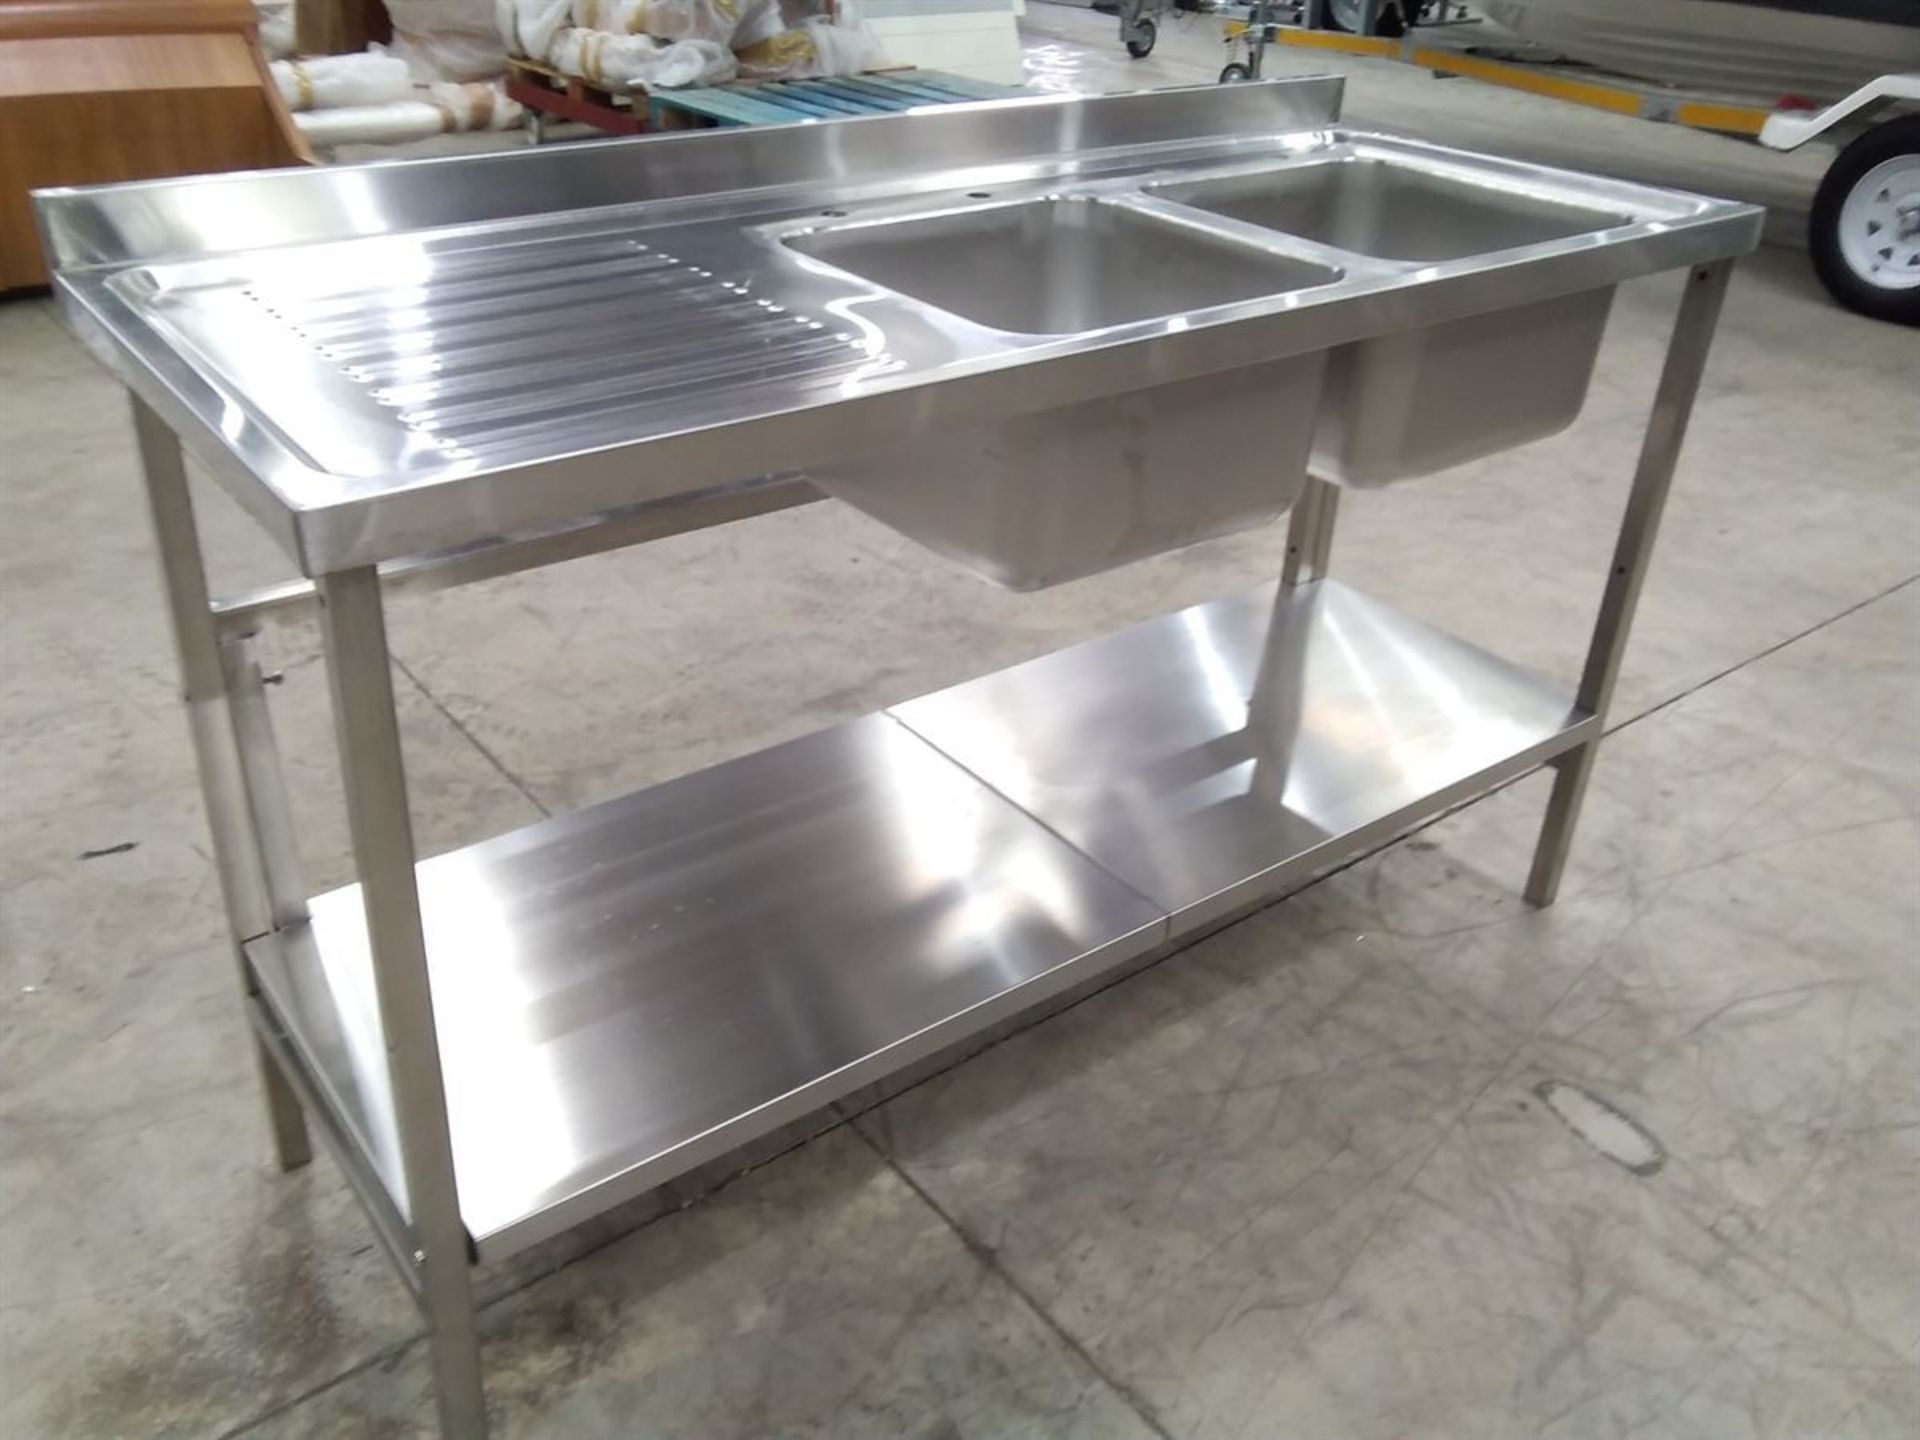 Diaminox MT-186A Stainless Steel Double Sink Unit - Right Hand Drain - 1800 x 600 x 900mm - Image 2 of 3